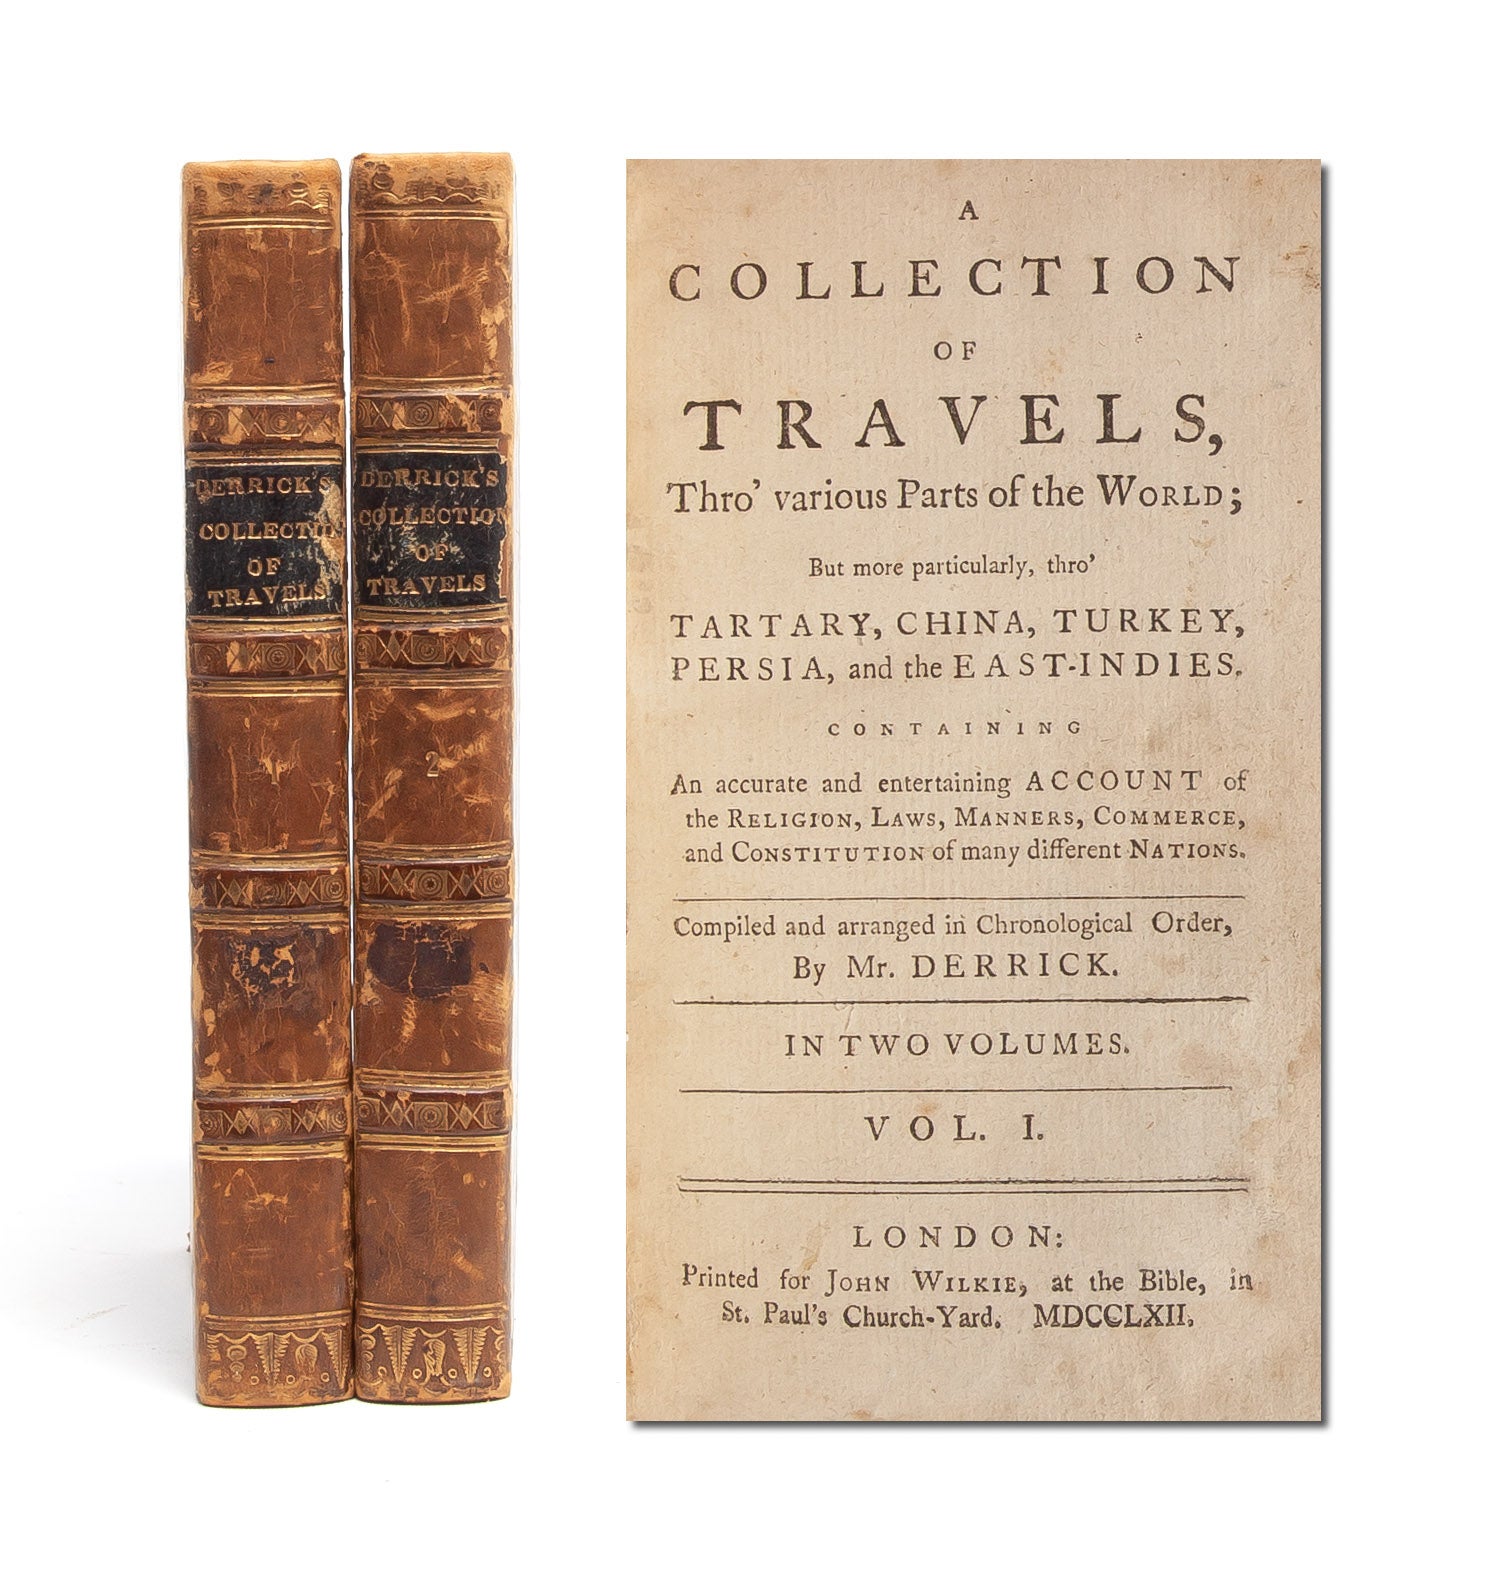 (Item #5478) A Collection of Travels Thro' Various Parts of the World...Containing an Accurate Account of the Religion, Laws, Manners, Commerce, and Constitution of Many Different Nations (in 2 vols.). Erotic Literature, Samuel Derrick.